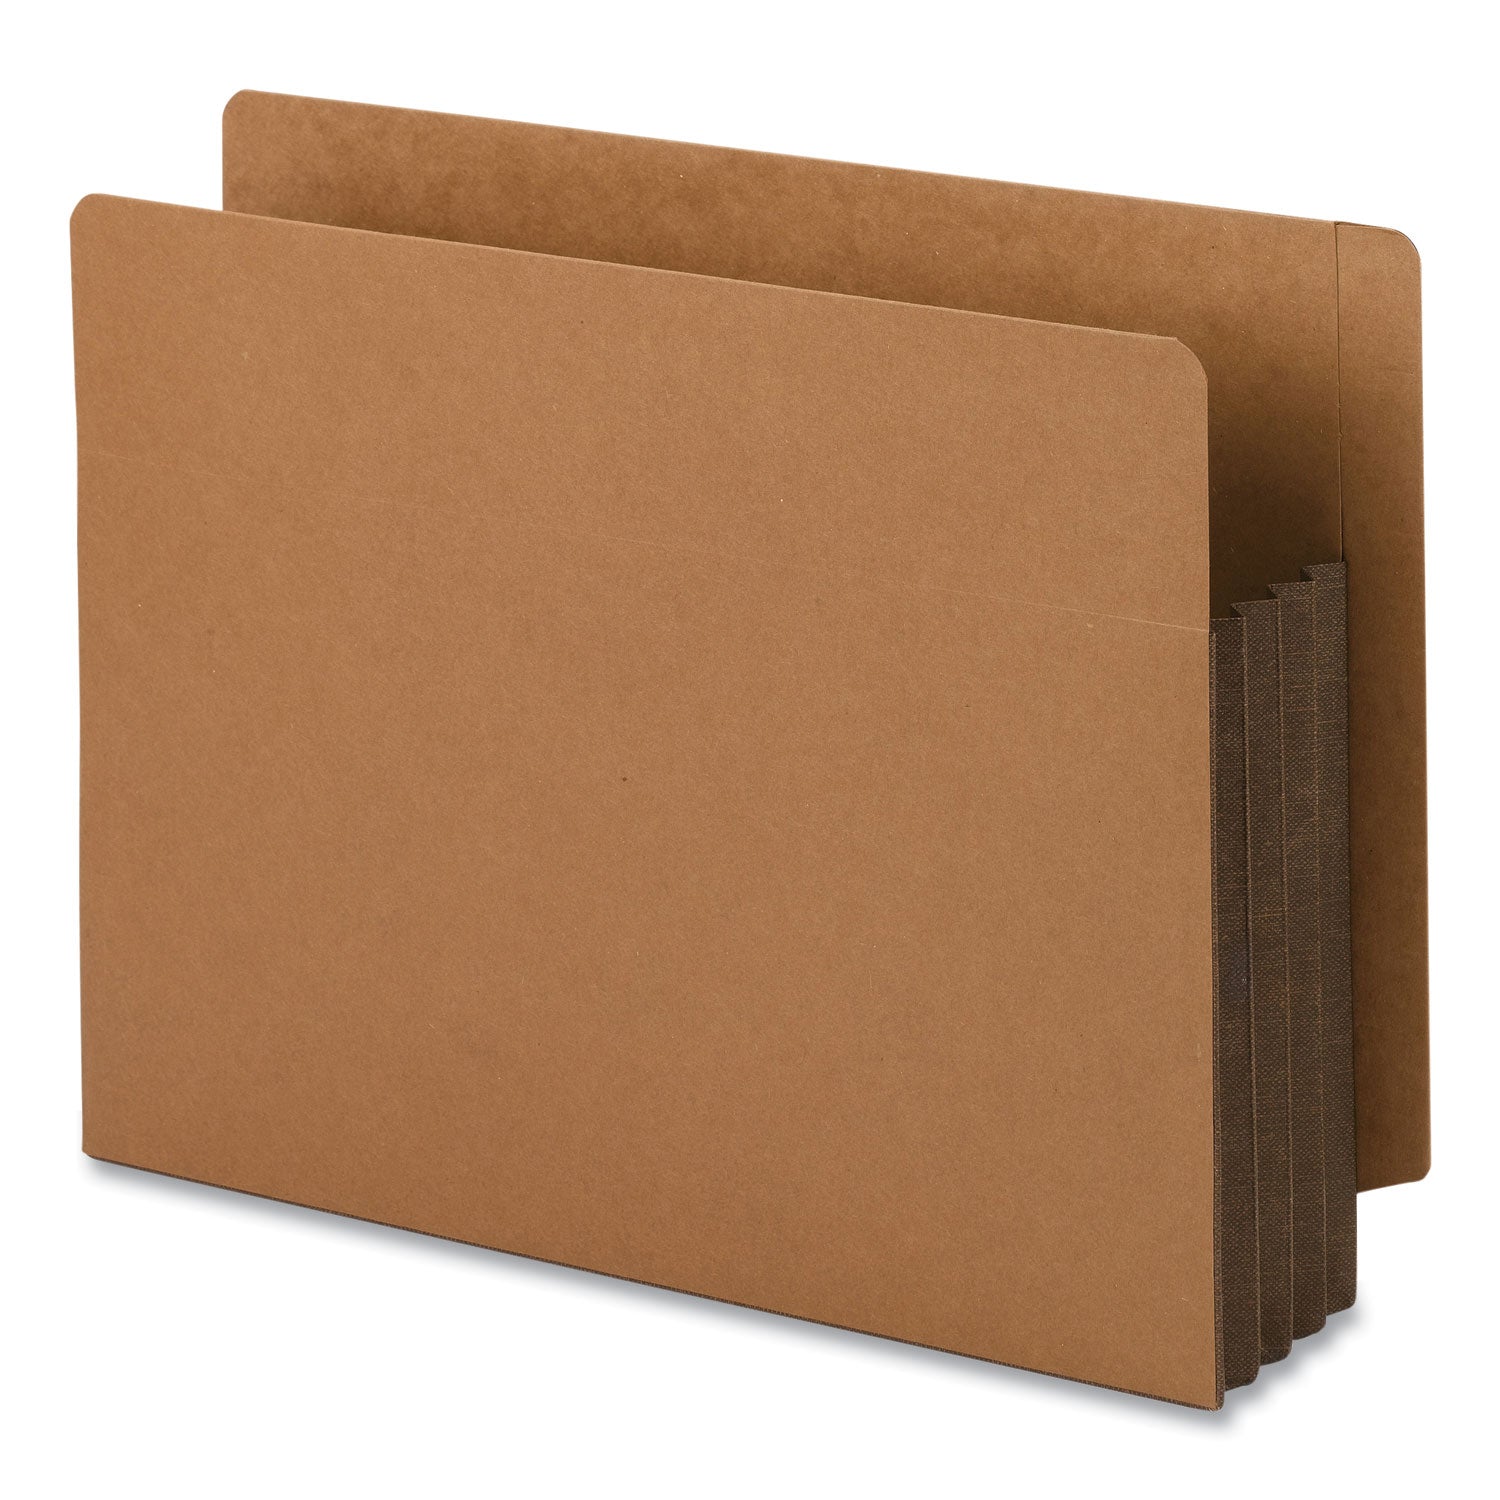 Redrope Drop-Front End Tab File Pockets, Fully Lined 6.5" High Gussets, 3.5" Expansion, Letter Size, Redrope/Brown, 10/Box - 